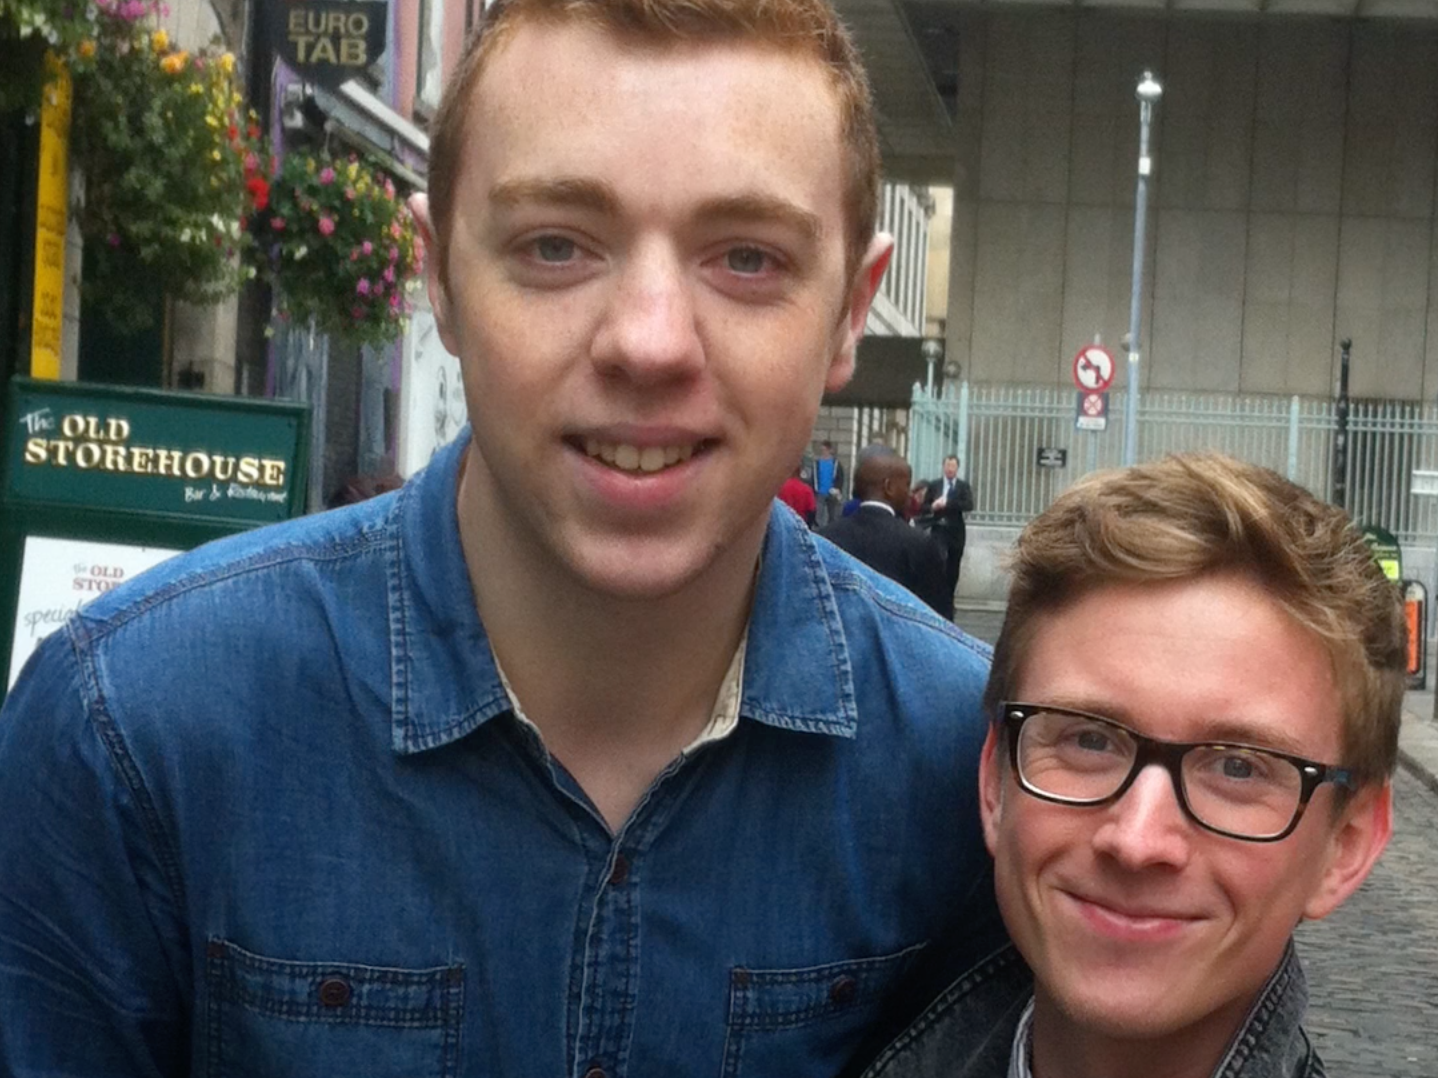 Picture shows Brian with YouTube star Tyler Oakley in Dublin, Ireland in 2012.